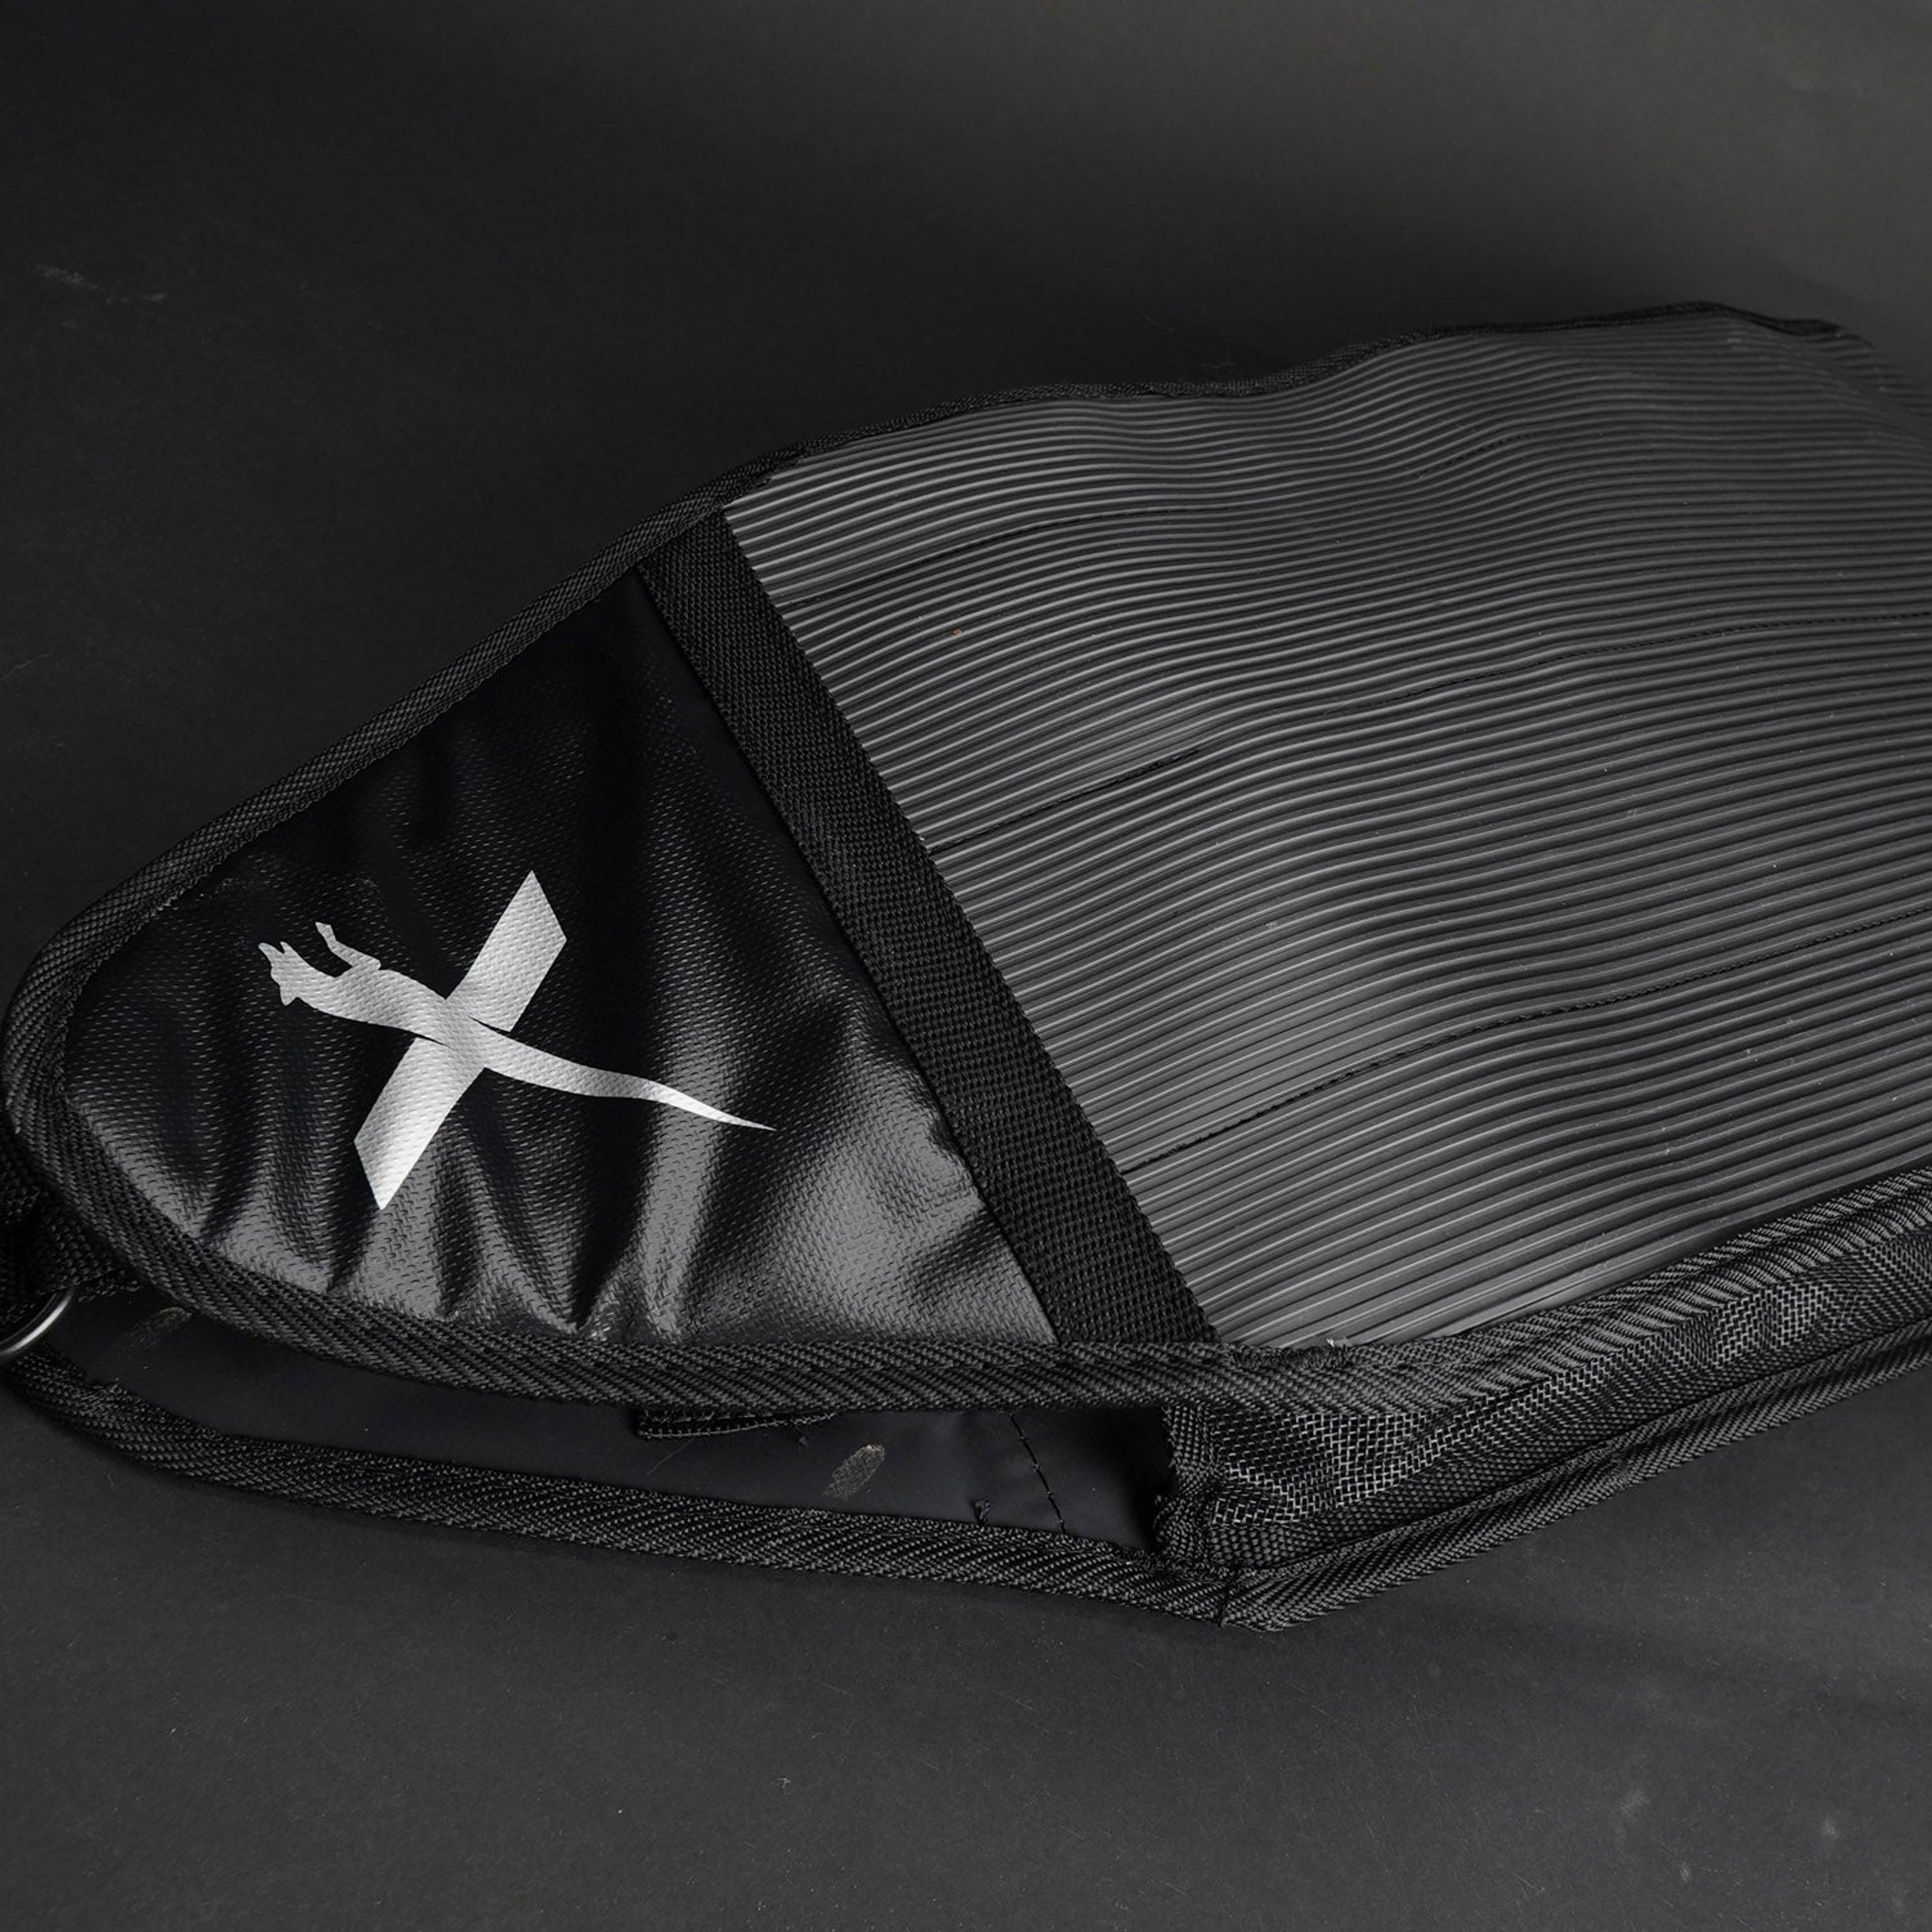 XDOG Weighted Drag Bag